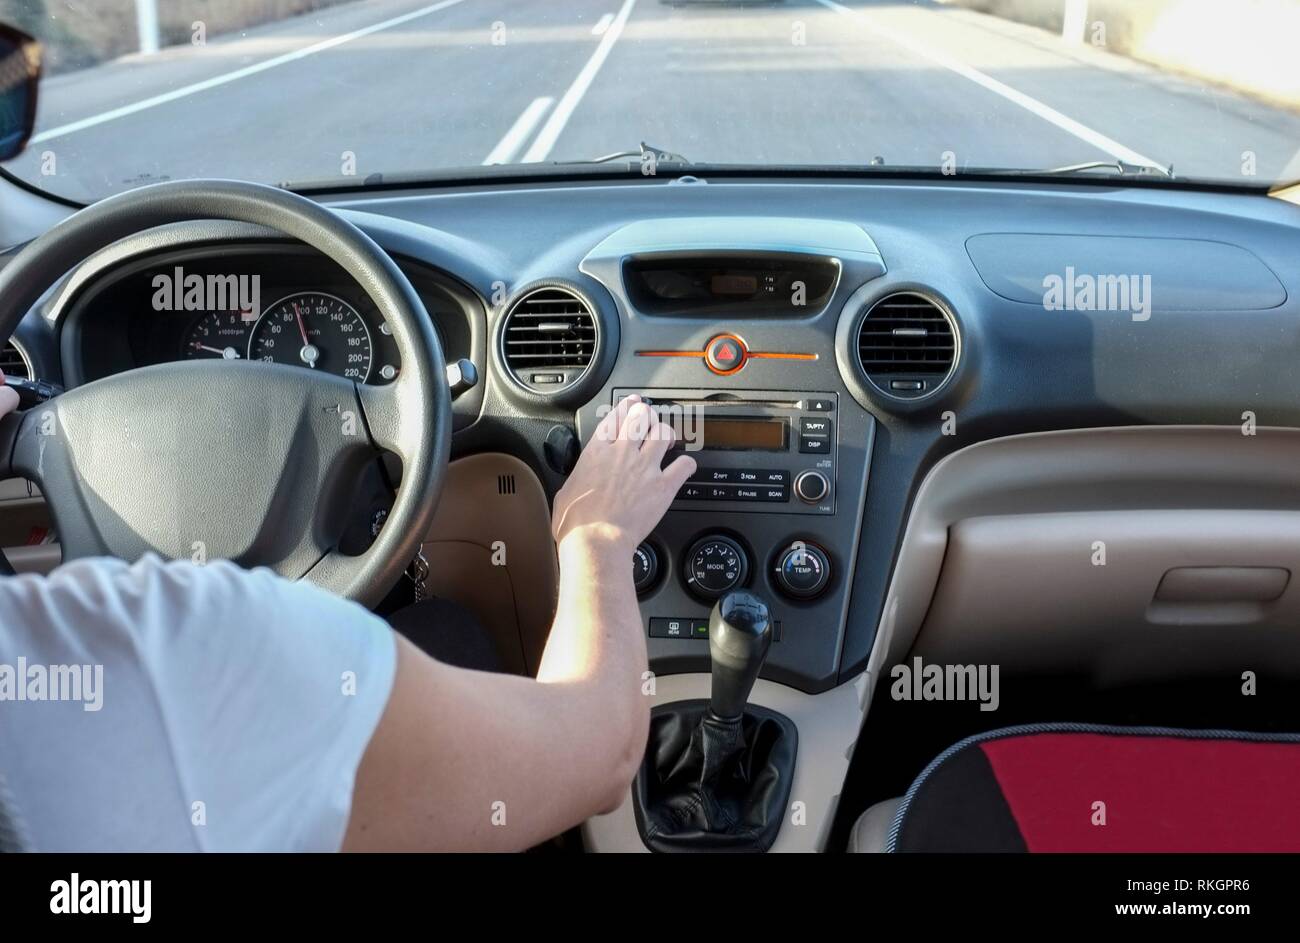 Woman pressing CD Audio eject button while she is driving. Cause of Distracted Driving Accidents concept. Inside car view. Stock Photo